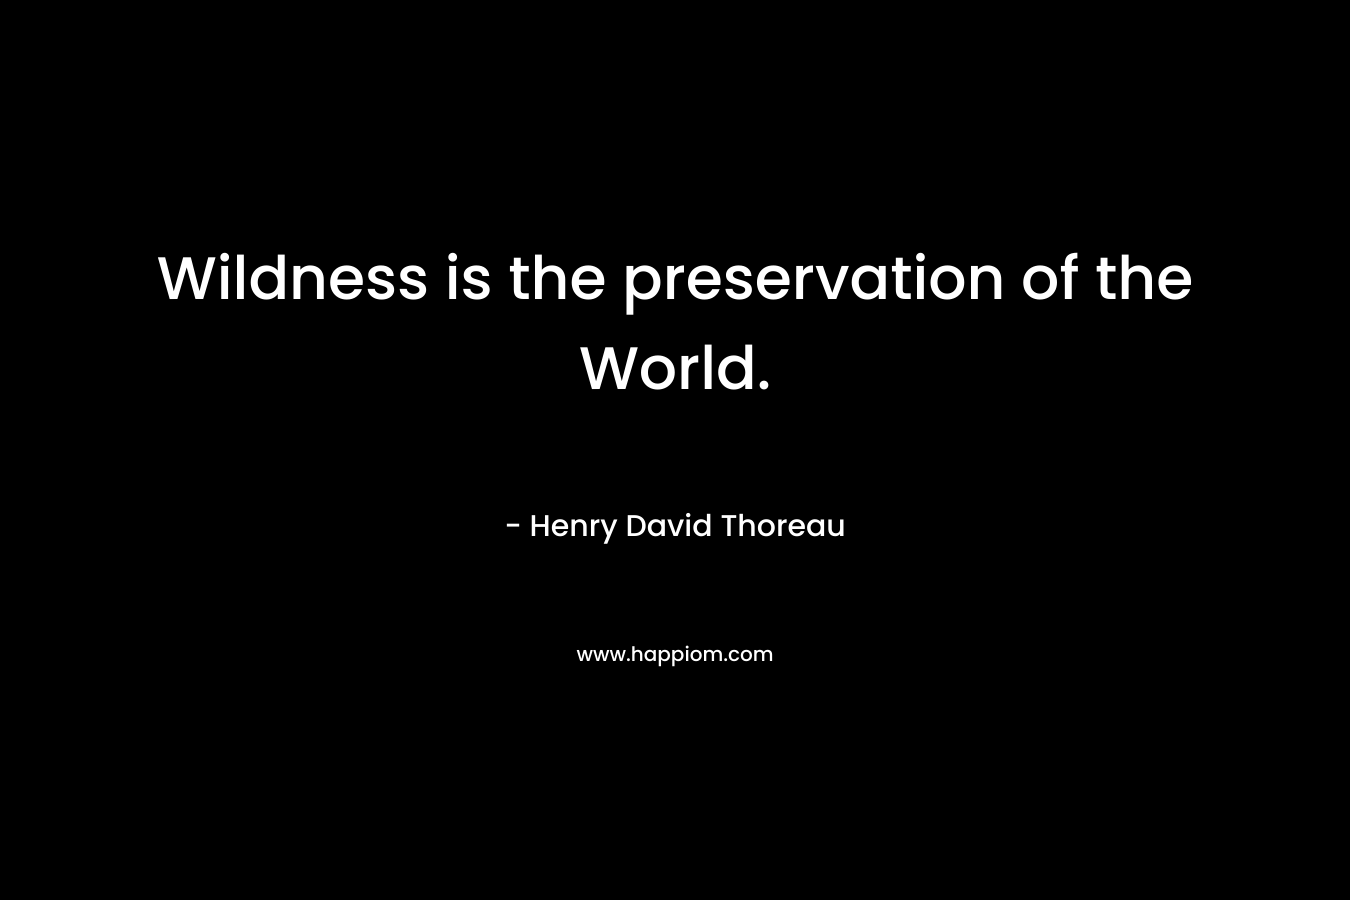 Wildness is the preservation of the World. – Henry David Thoreau